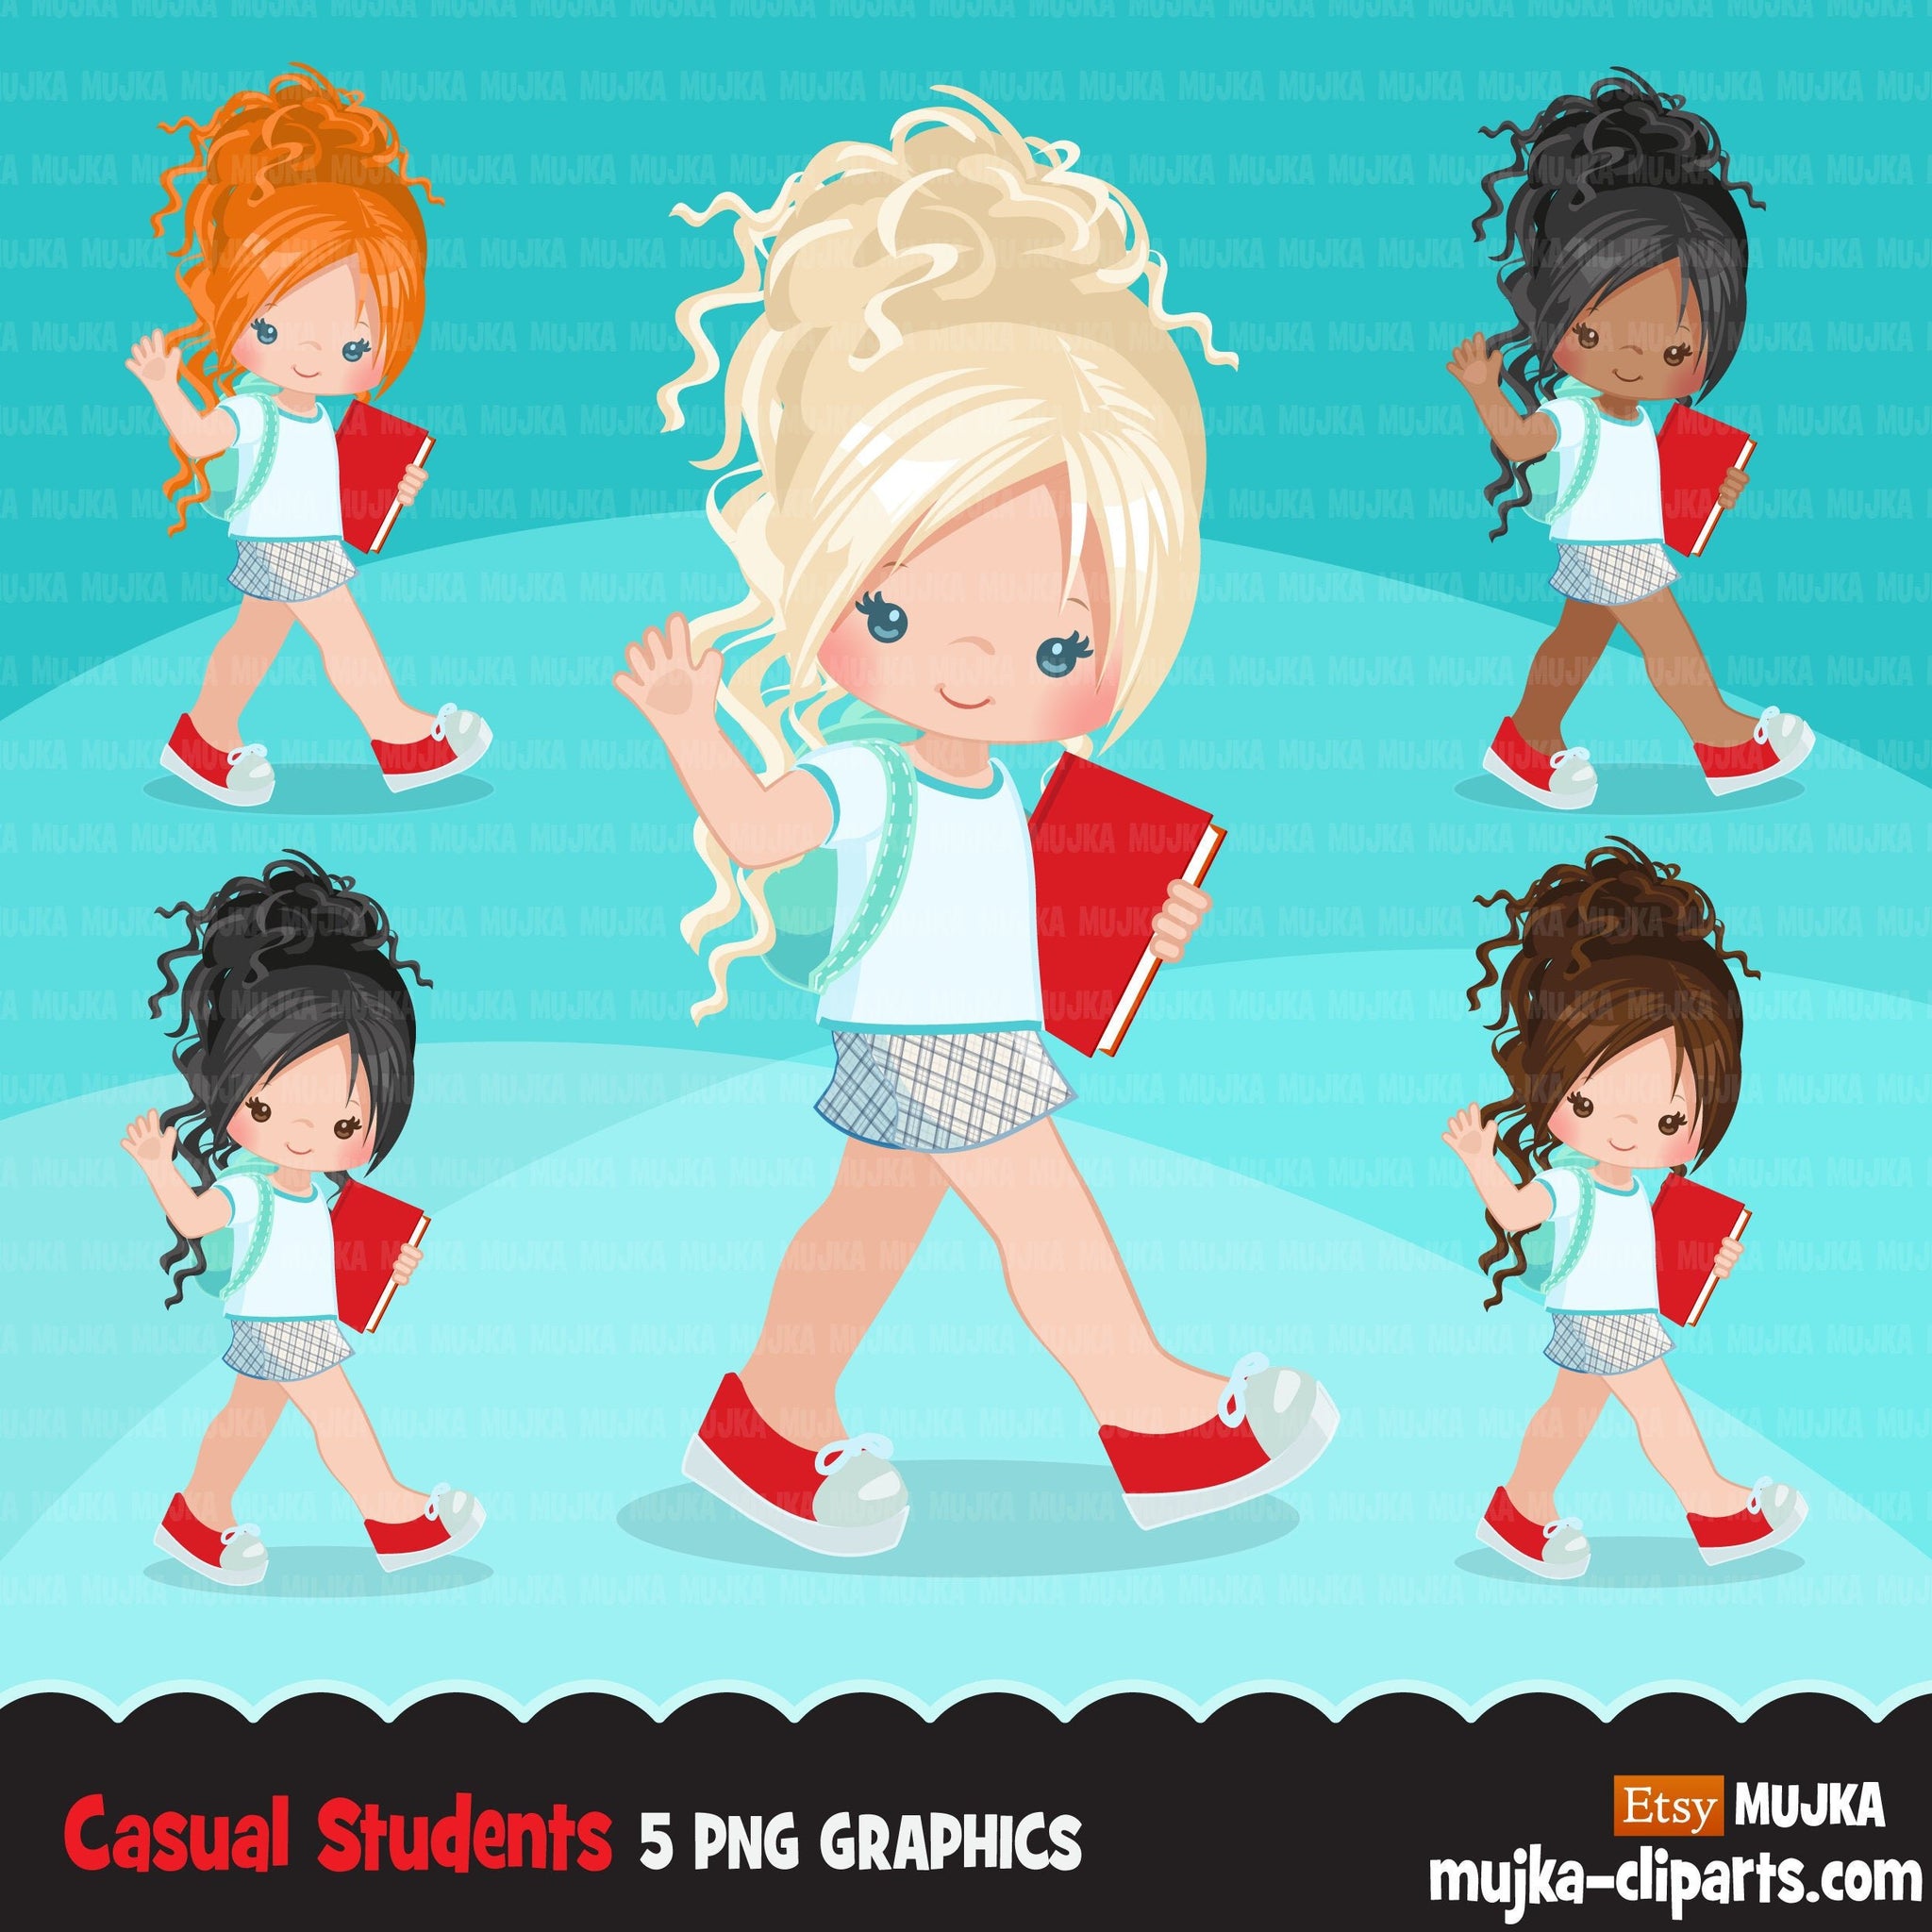 Causal Students clipart, Back to School girl character graphics, clip art planner stickers, embroidery, activity, education, teaching